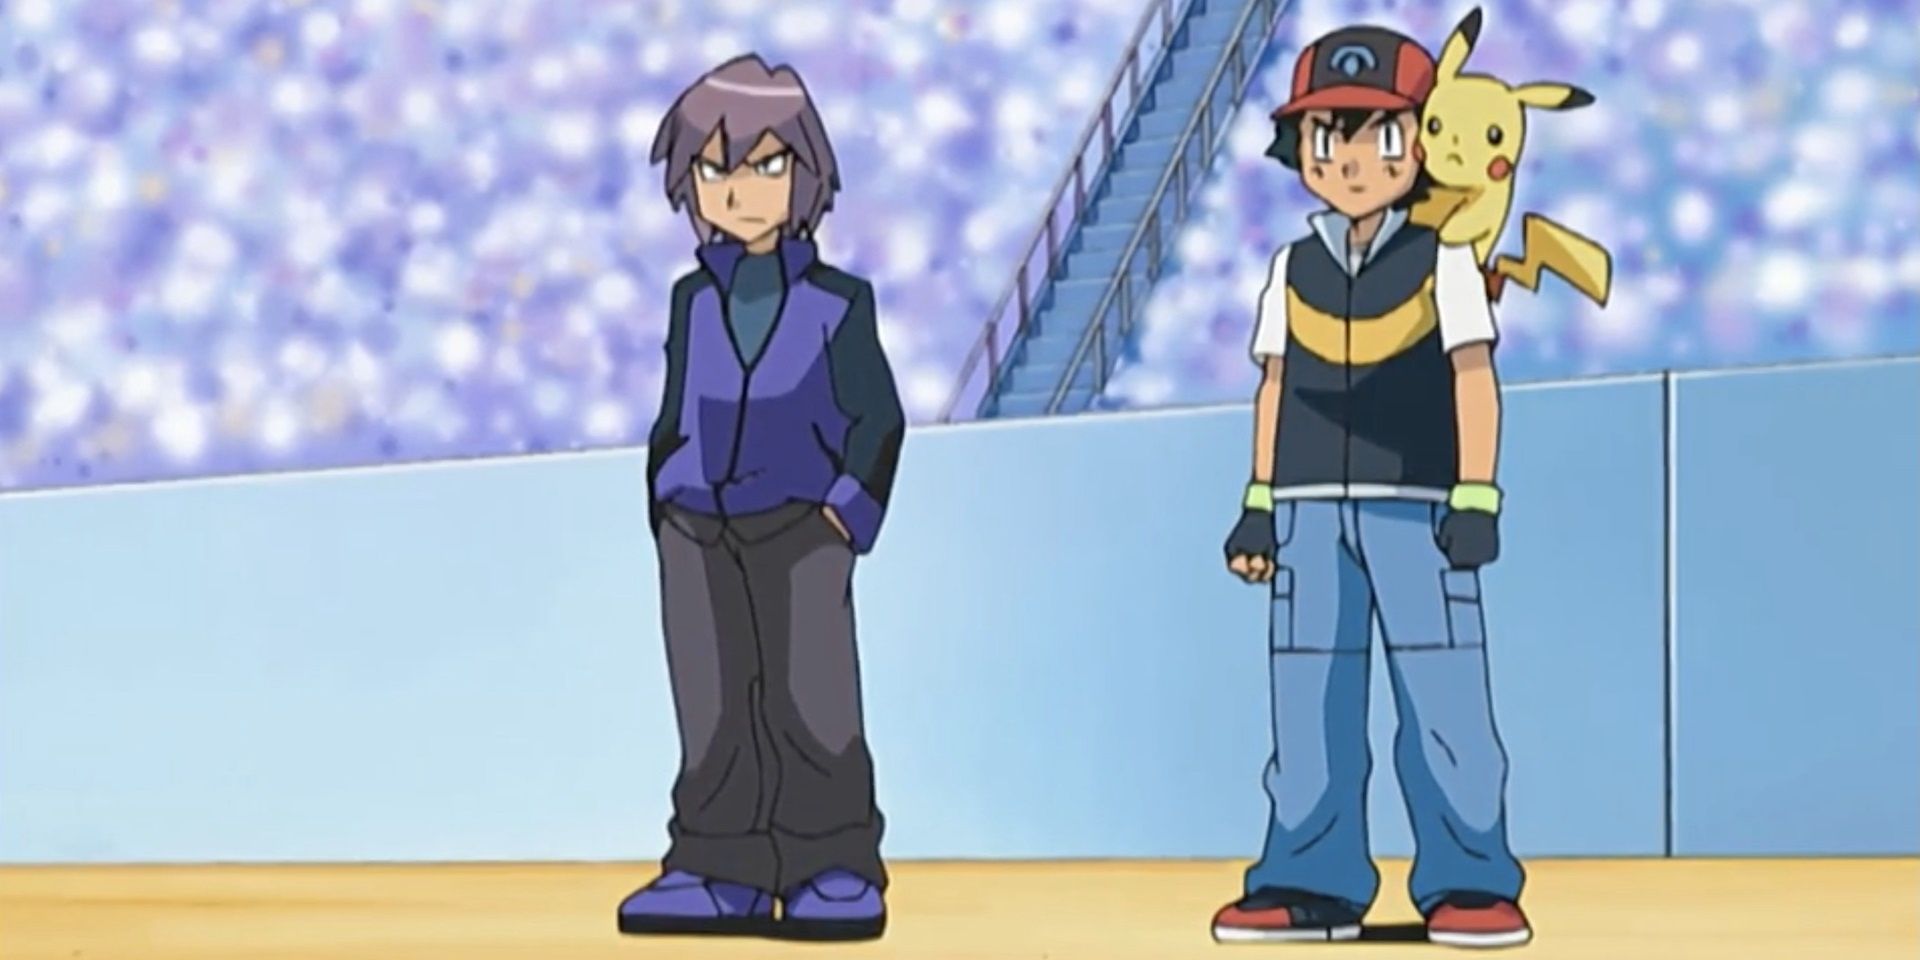 Ash and Paul stand next to each other in an arena in Pokémon.